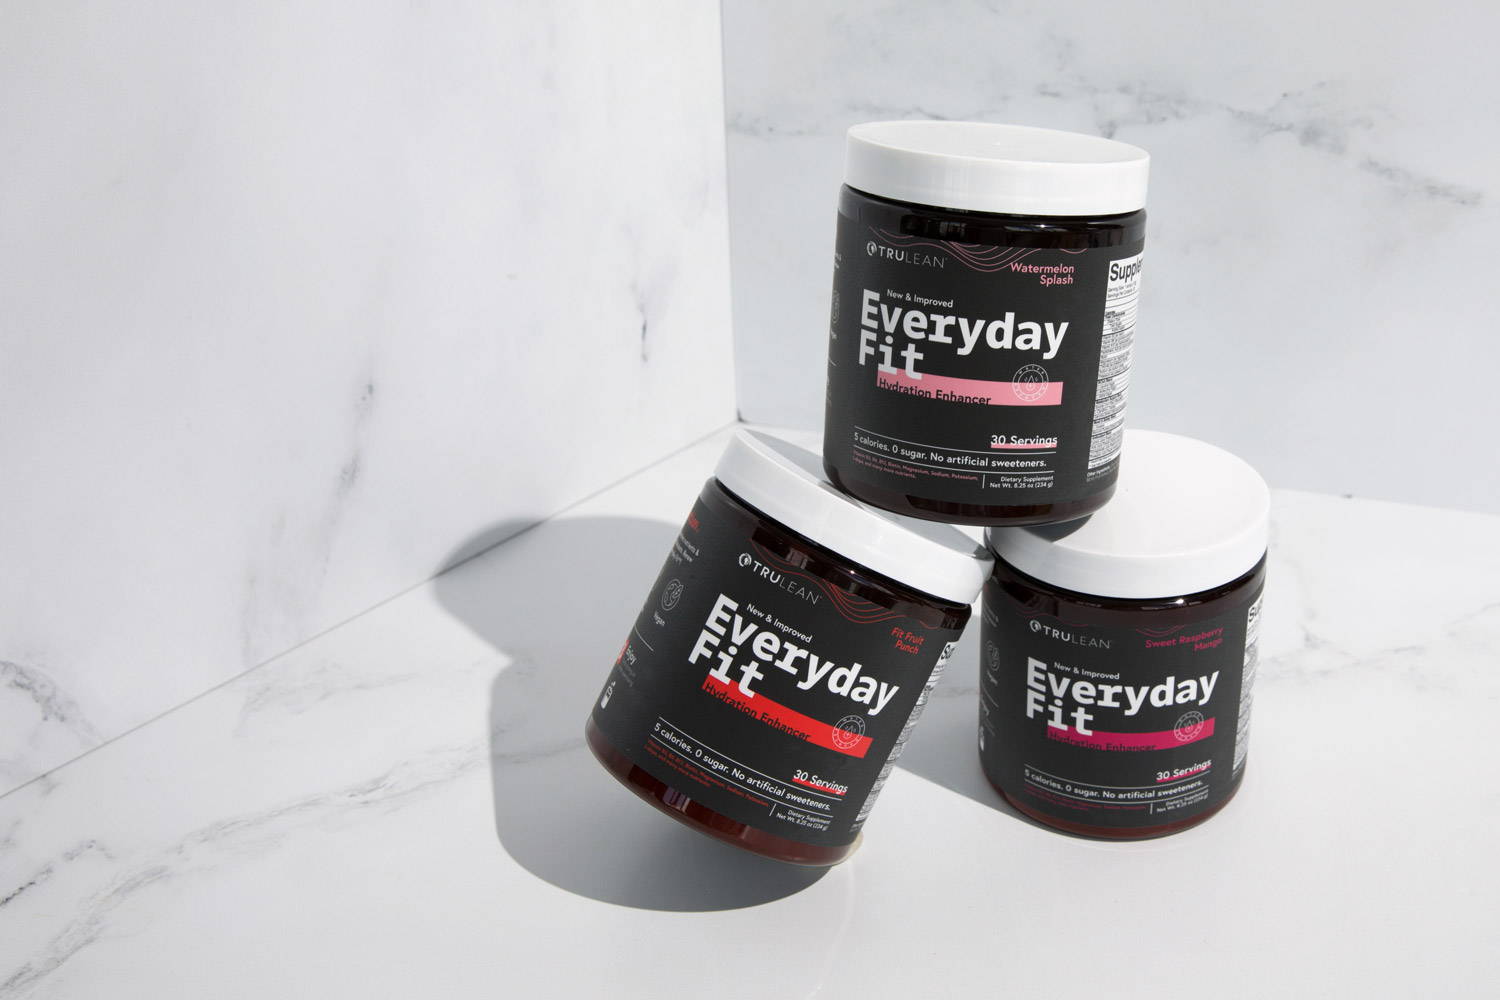 Everyday Fit™ is a vitamin-enhanced super powder that dissolves easily in water, a great replacement for sugary sodas or fruit juices.